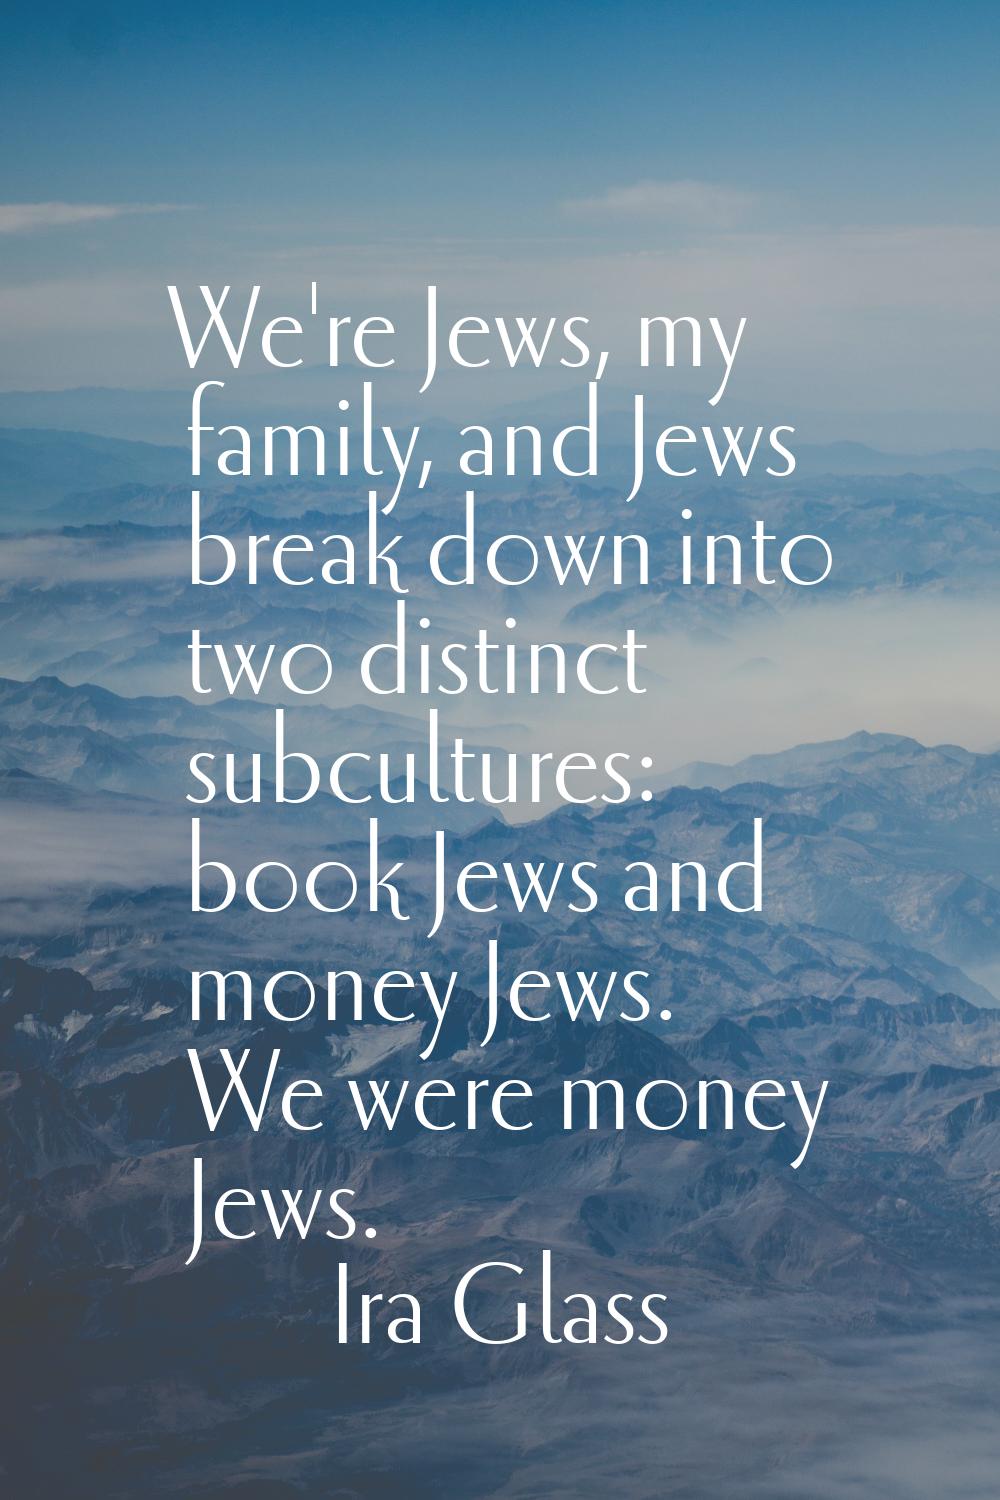 We're Jews, my family, and Jews break down into two distinct subcultures: book Jews and money Jews.